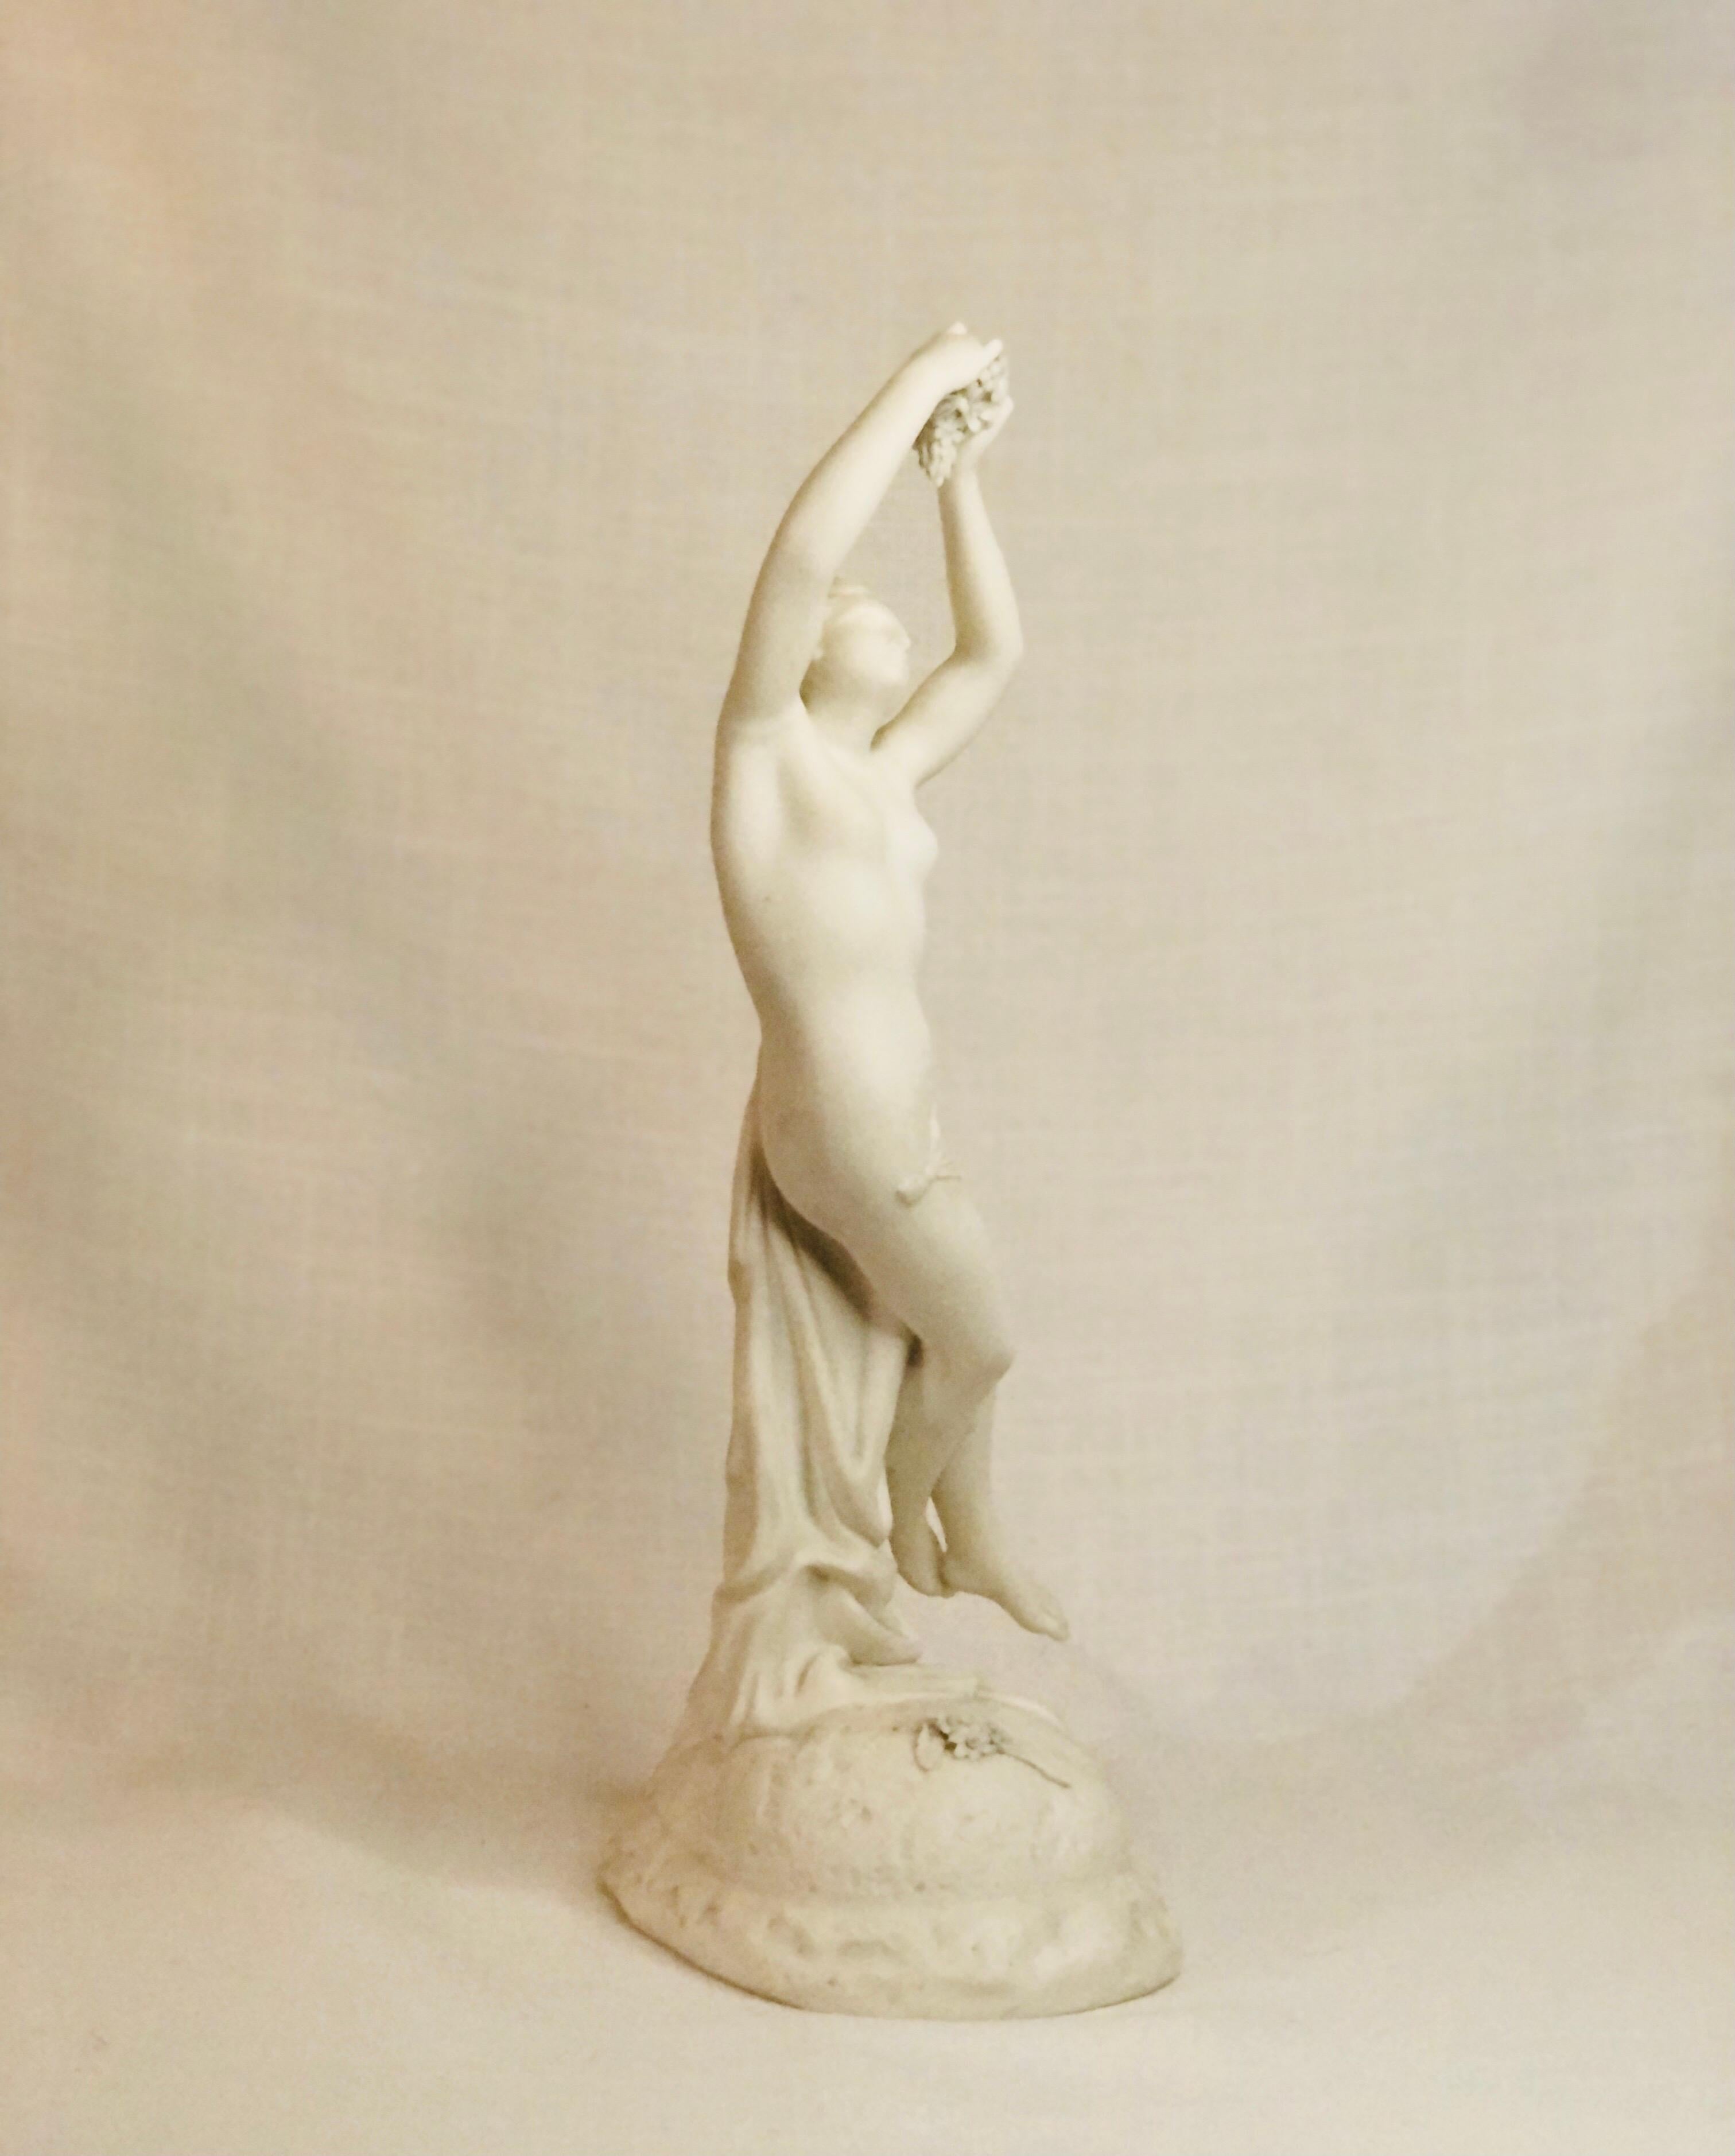 Late 19th Century Graceful English Parian Statue of Semi-Nude Lady Holding Grapes above Her Head